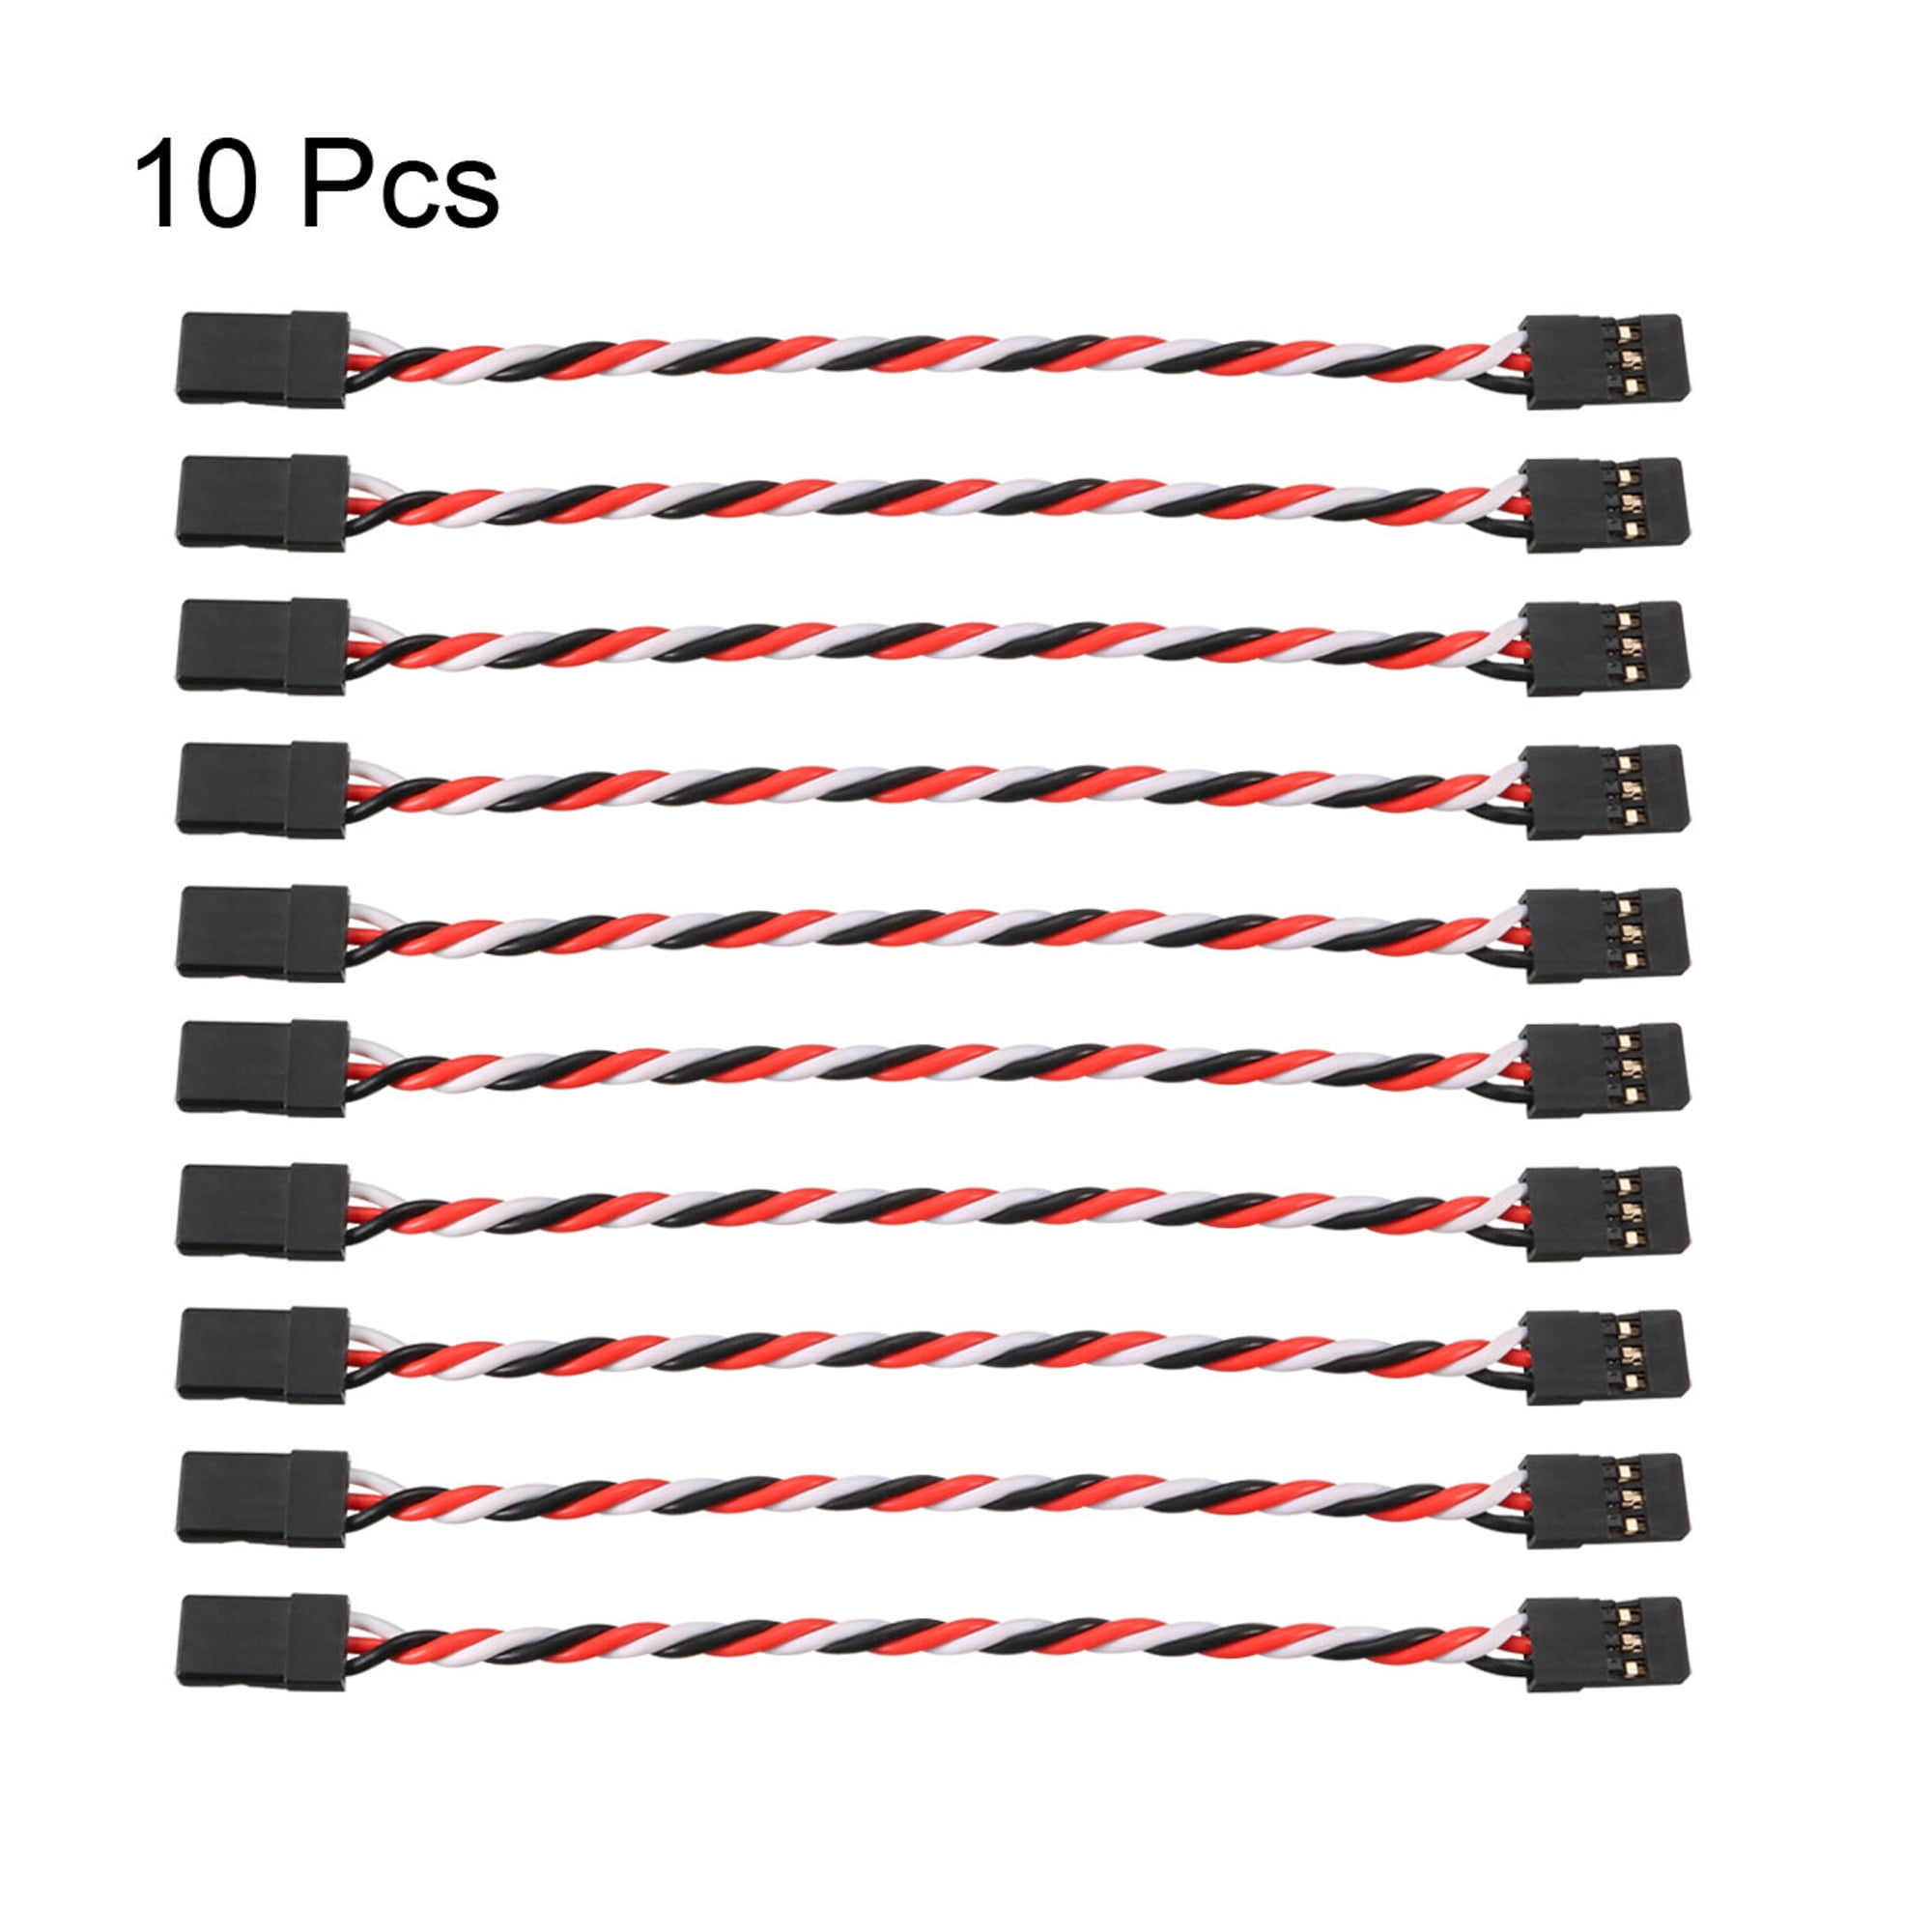 Details about  / 10Pcs 10cm Servo Extension Cable 60 Core RC Futaba Lock Anti-interference